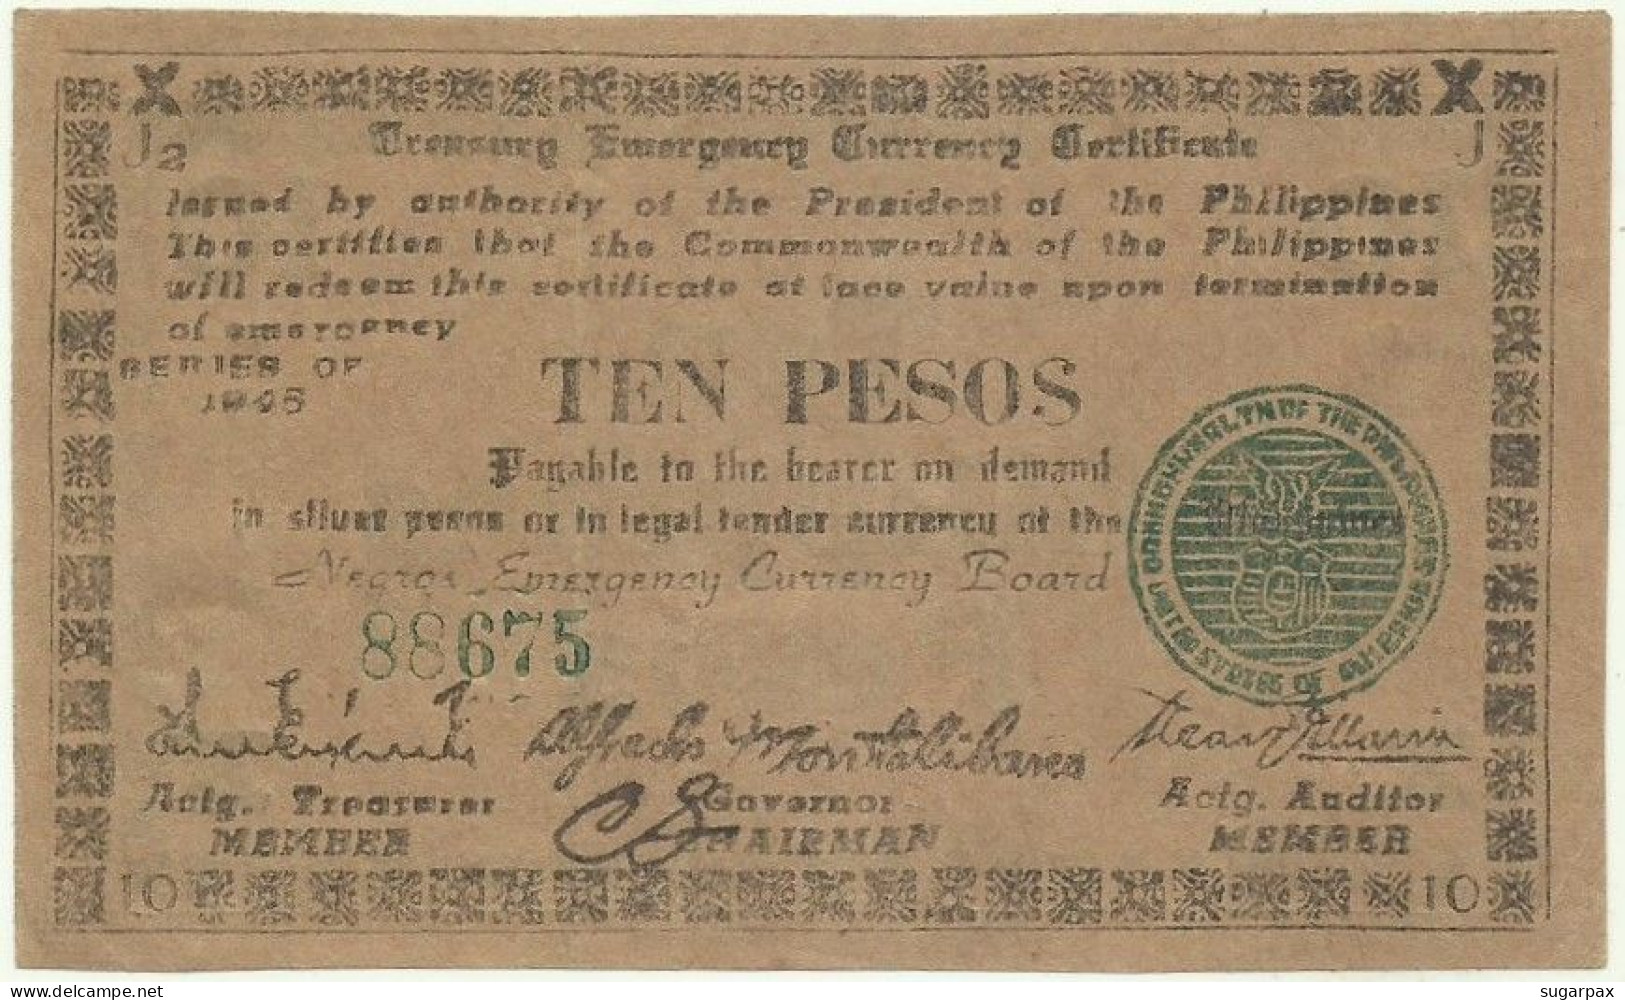 PHILIPPINES - 10 Pesos - 1945 - Pick S 683 - Serie J2 - Negros Emergency Currency Board - Philippines